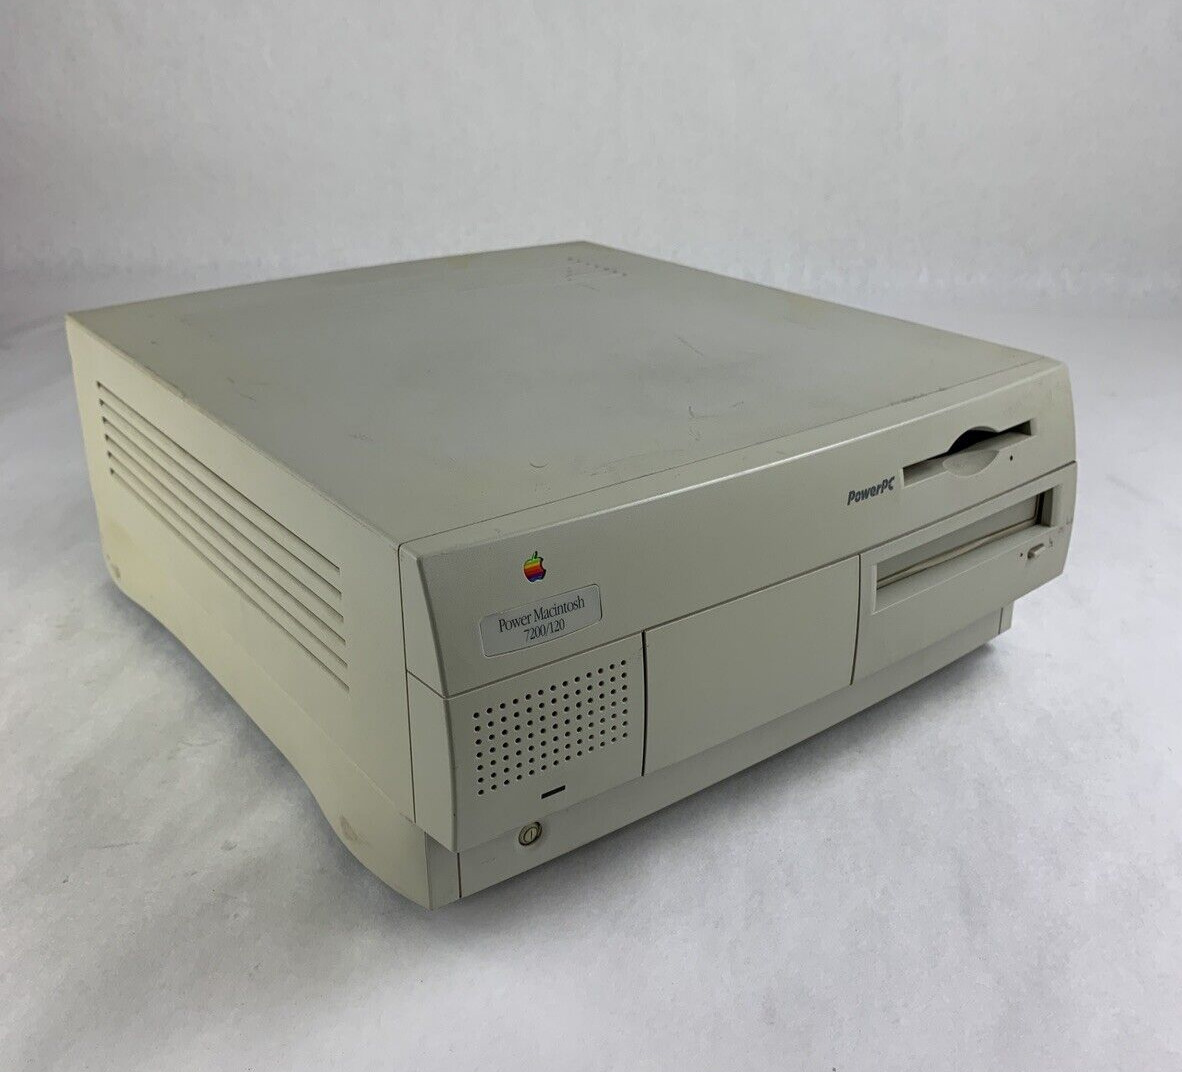 Vintage Apple Power Macintosh 7300/200 Tested and Boots From Disc